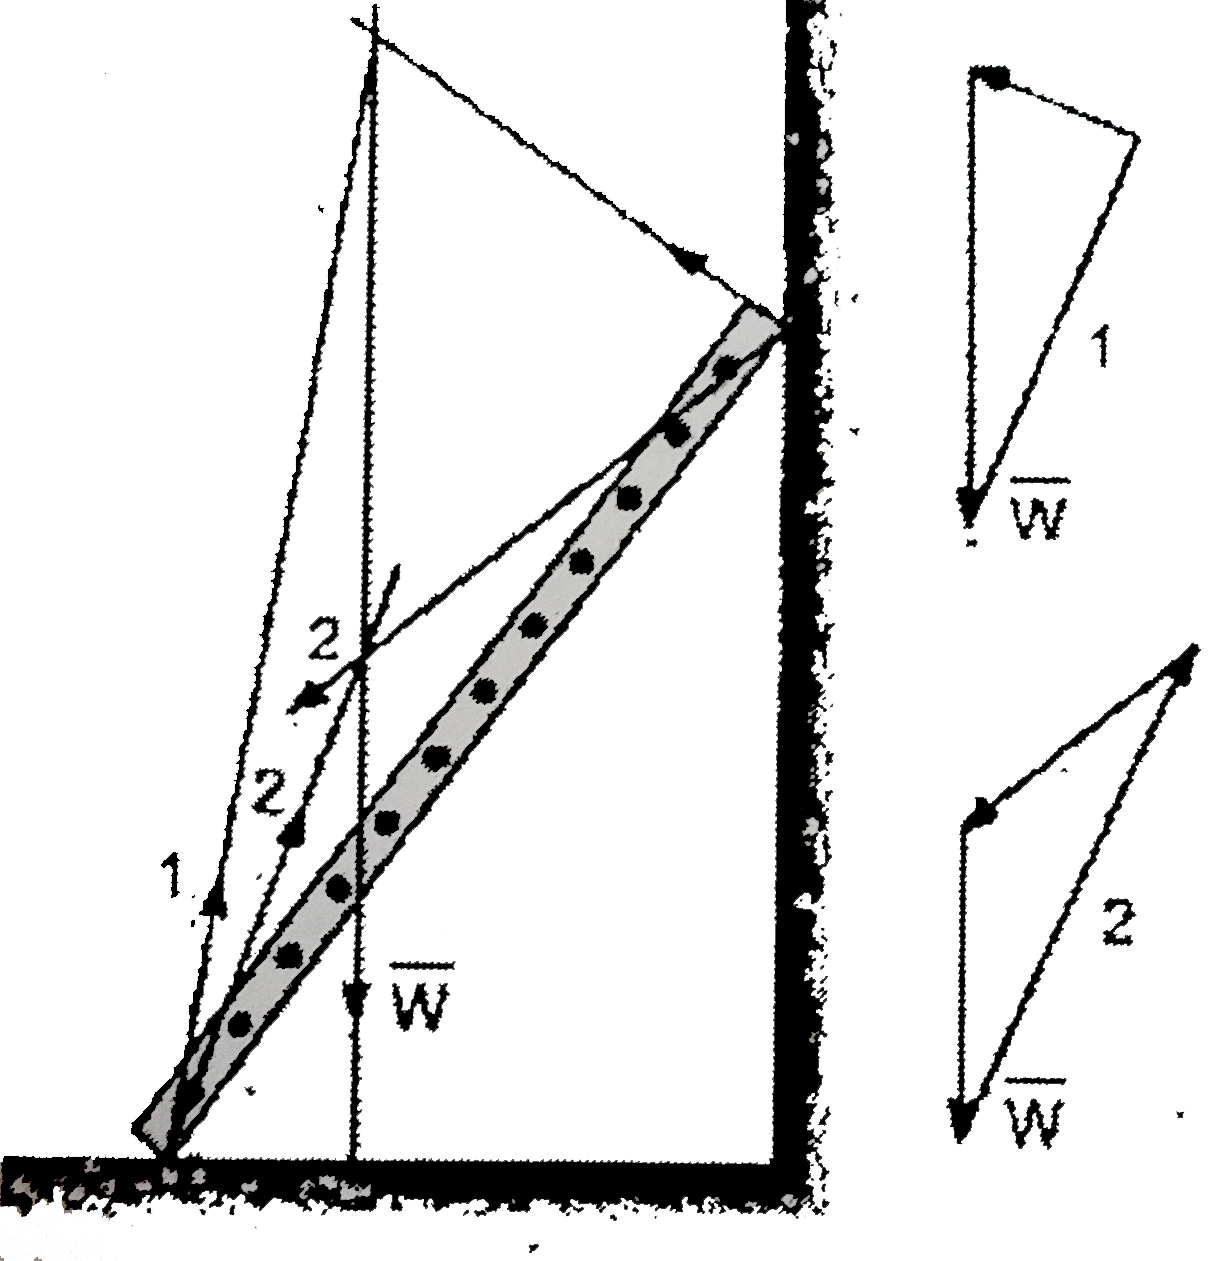 A ladder rests on the floor of a room, leaning agains a wall. If the coefficient of static friction between the ladder the floor is mu(f) and that between ladder and is mu(w), what is the minimum angle theta that the ladder can make with the floor if the ladder is not to slip? Assume that the mass of the ladder is distributed uniformly.